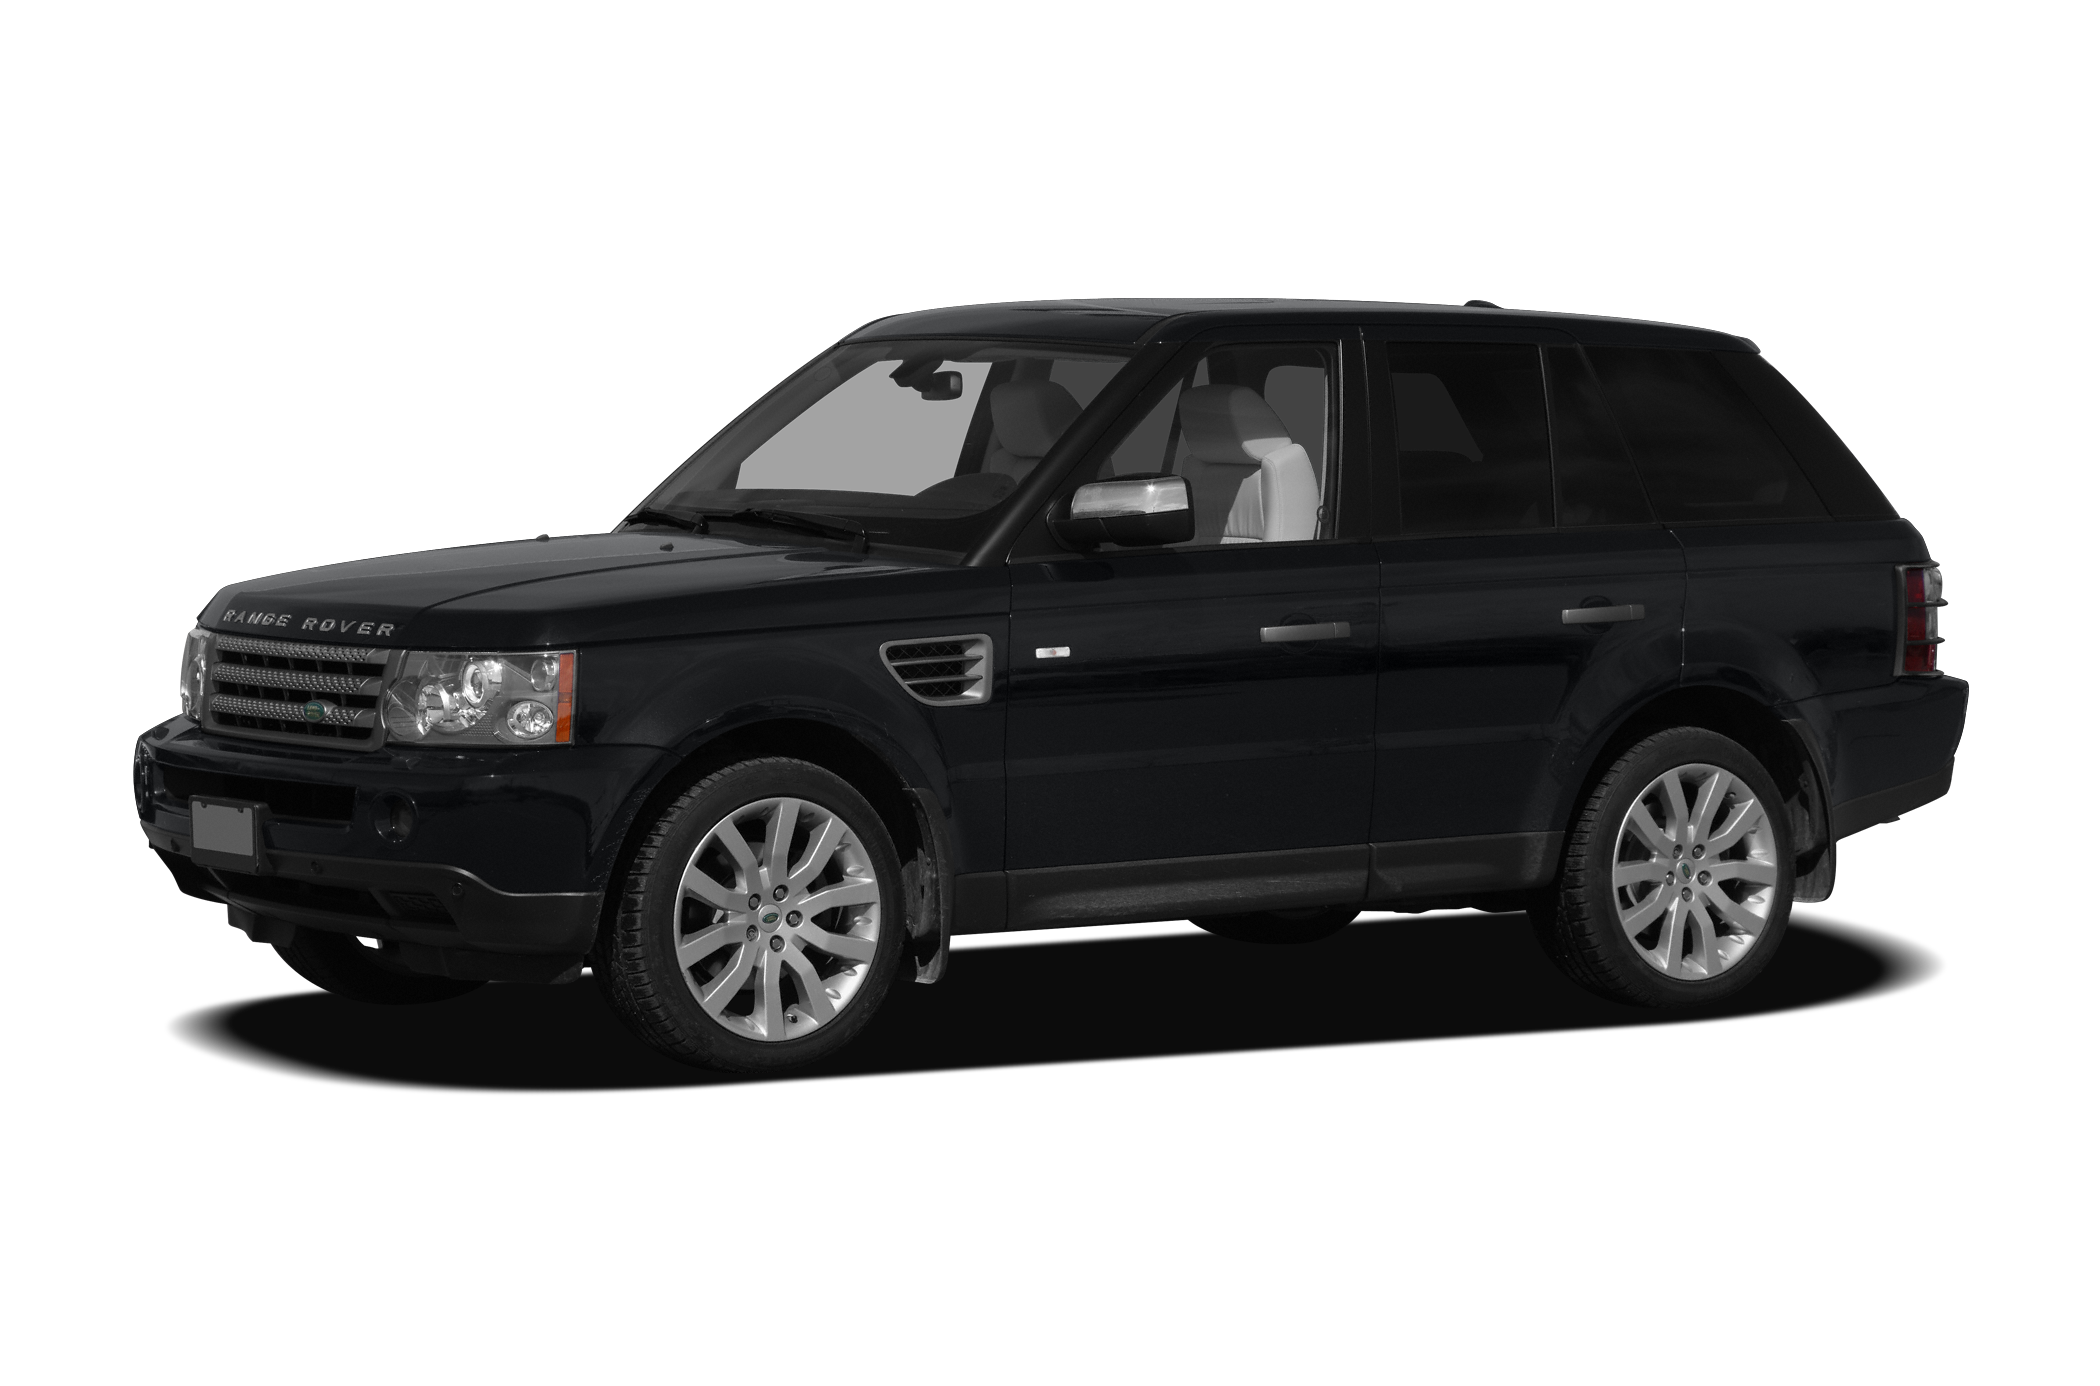 2009 Land Rover Range Rover Sport – Exploring 9 Videos and 70+ Images